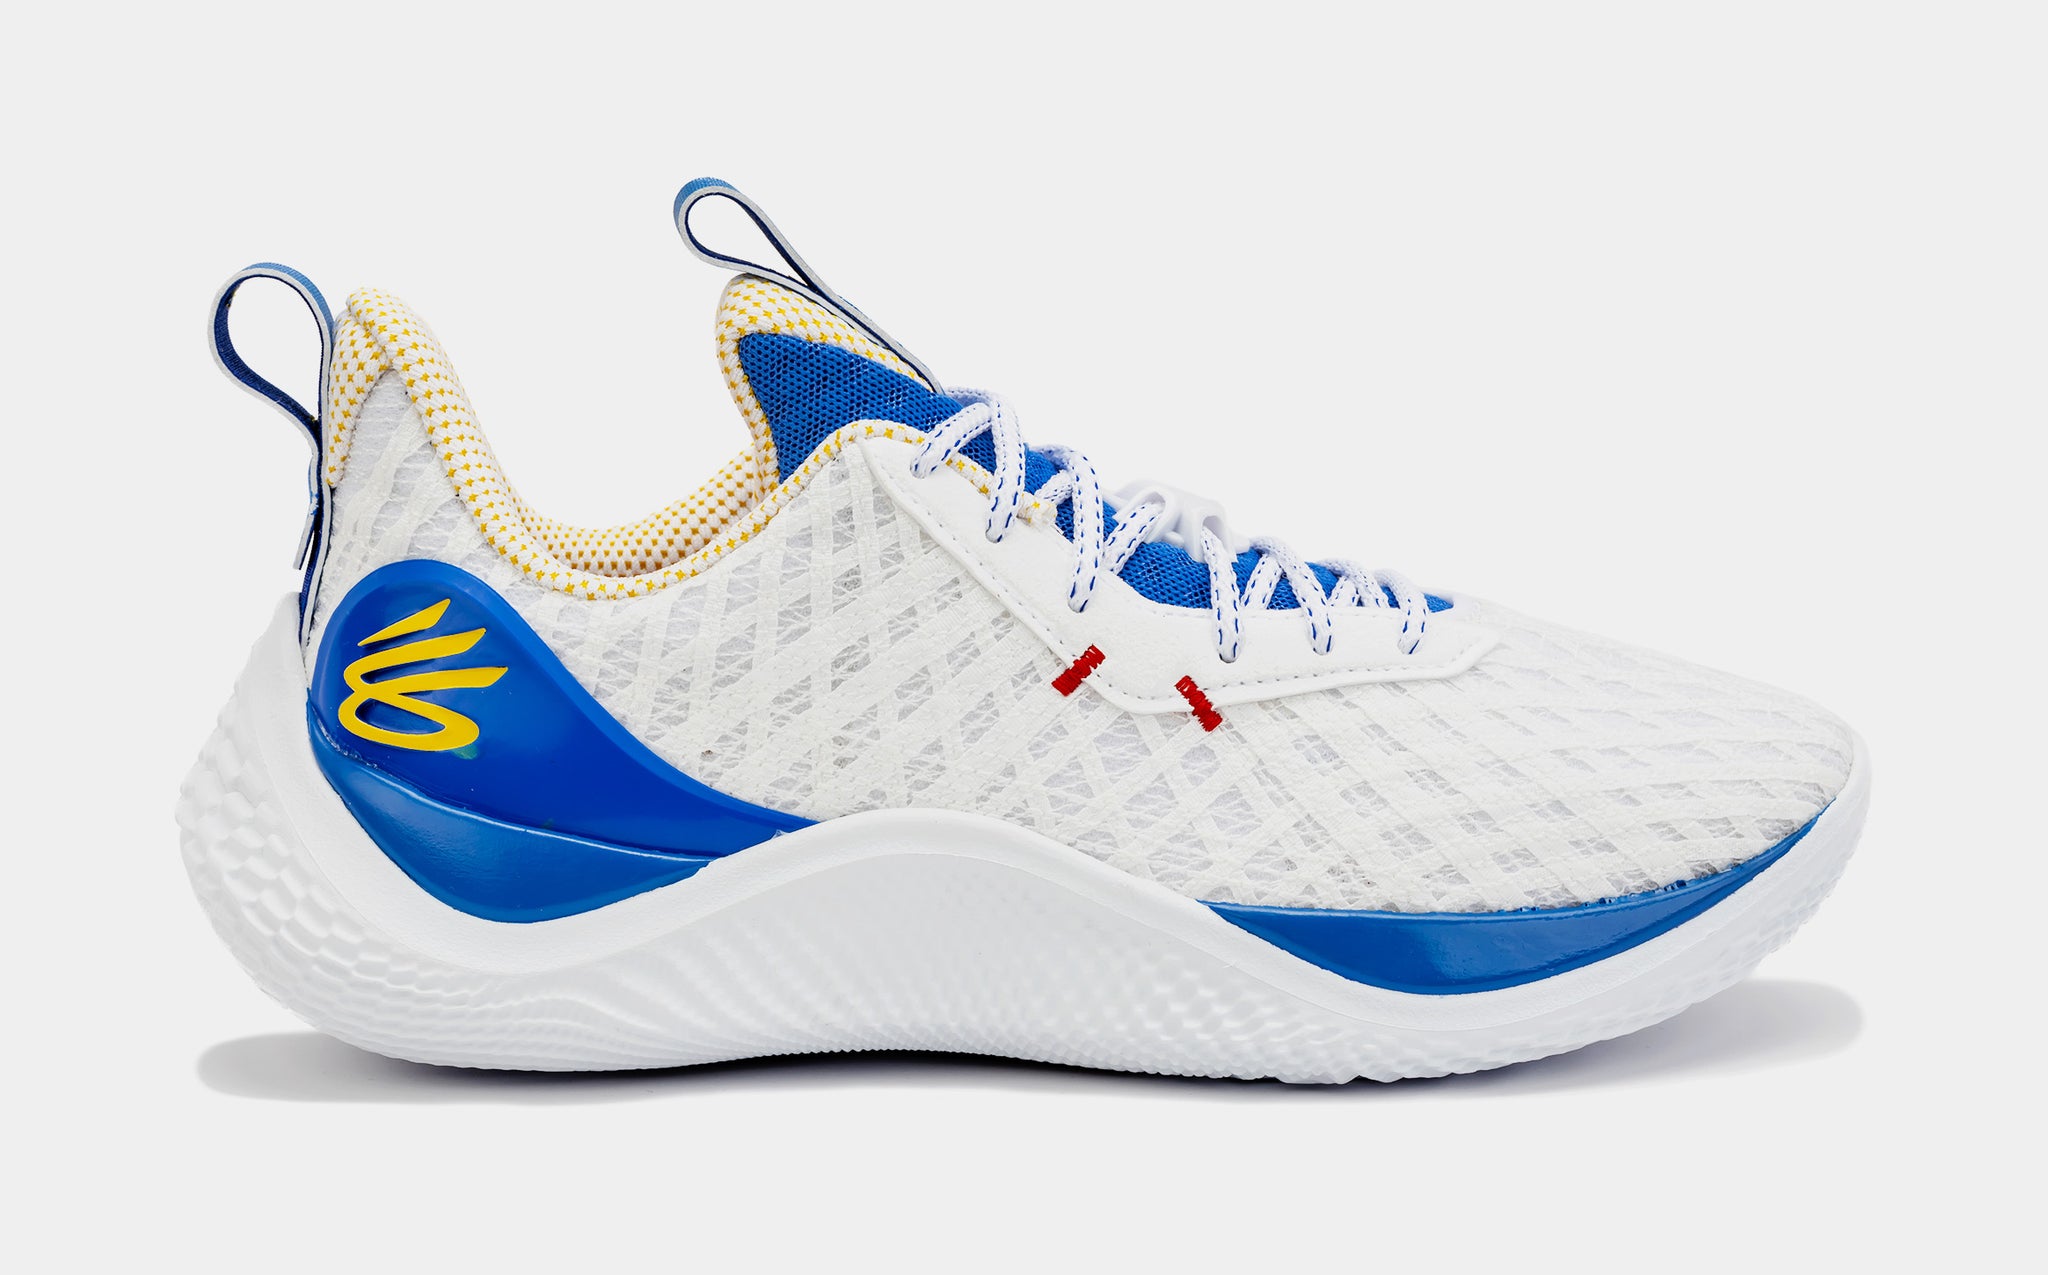 Under Armor Curry Low 1 Men 8 Warriors Blue Yellow Dubs